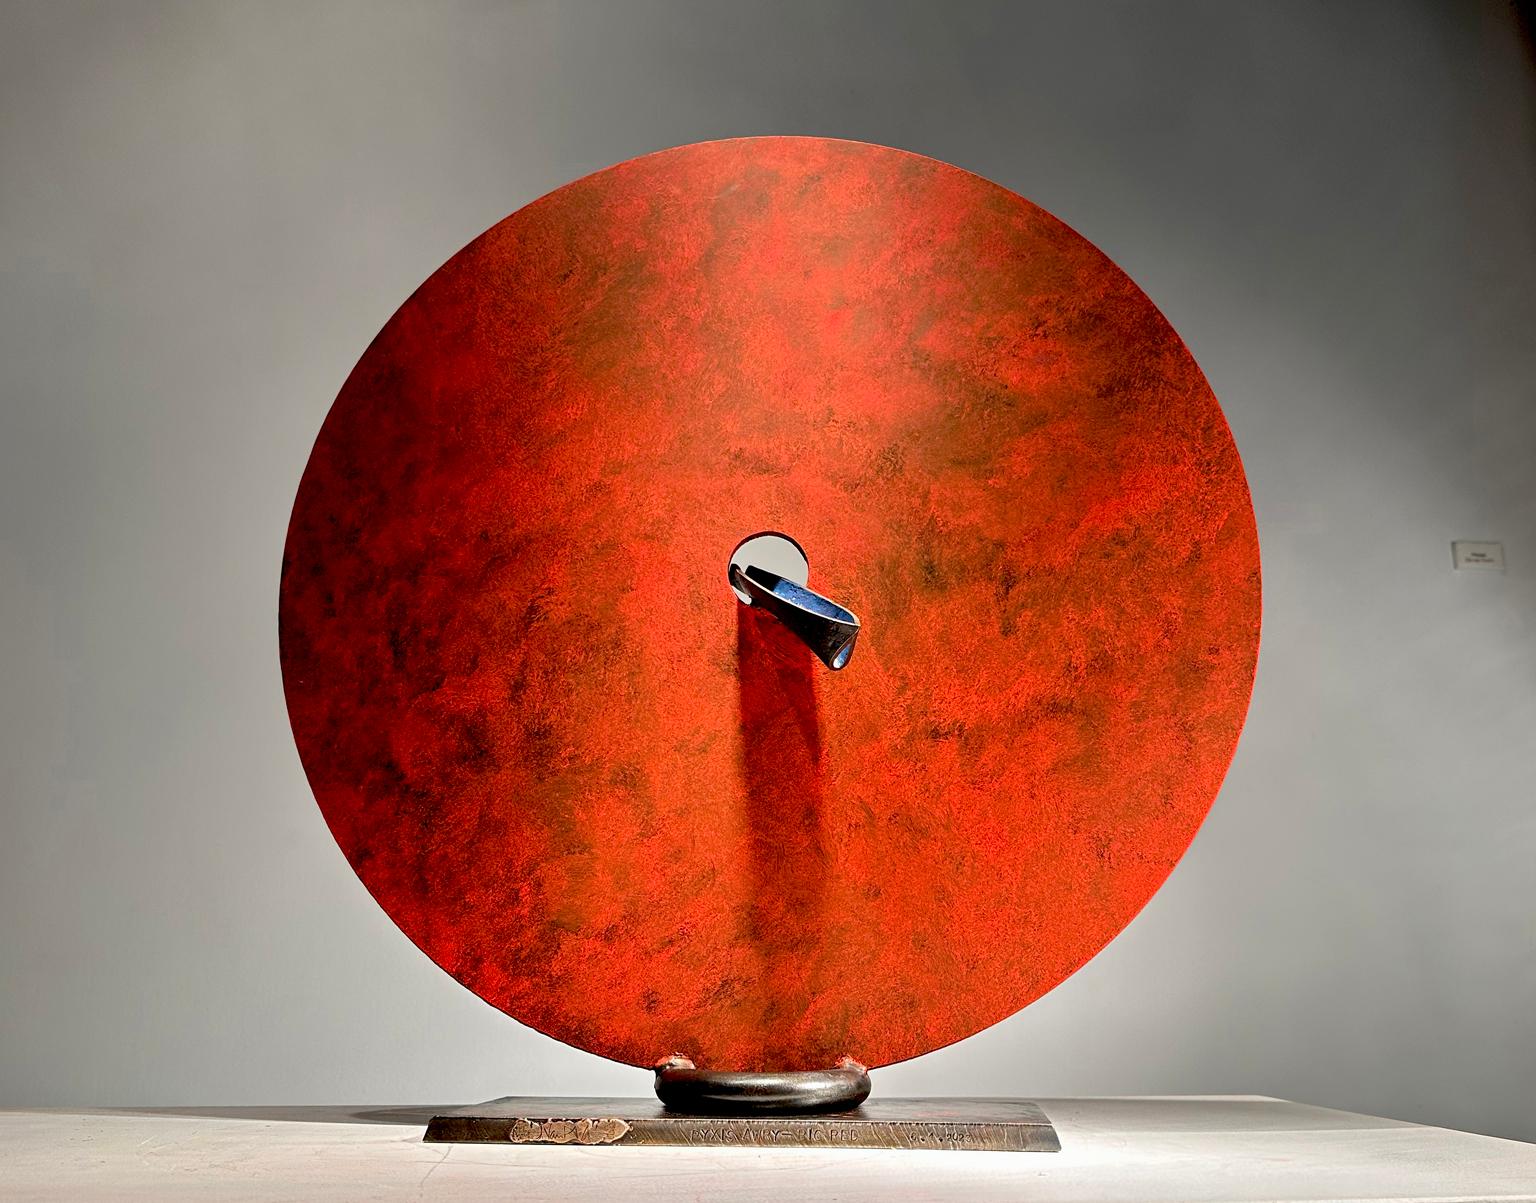 "Pyxis (big red" by John Van Alstine
Pigmented and sealed steel

The sculpture of John Van Alstine beautifully, and powerfully, balances the union of stone and metal, while exploring the relationship of the purely natural and the man-made. He has